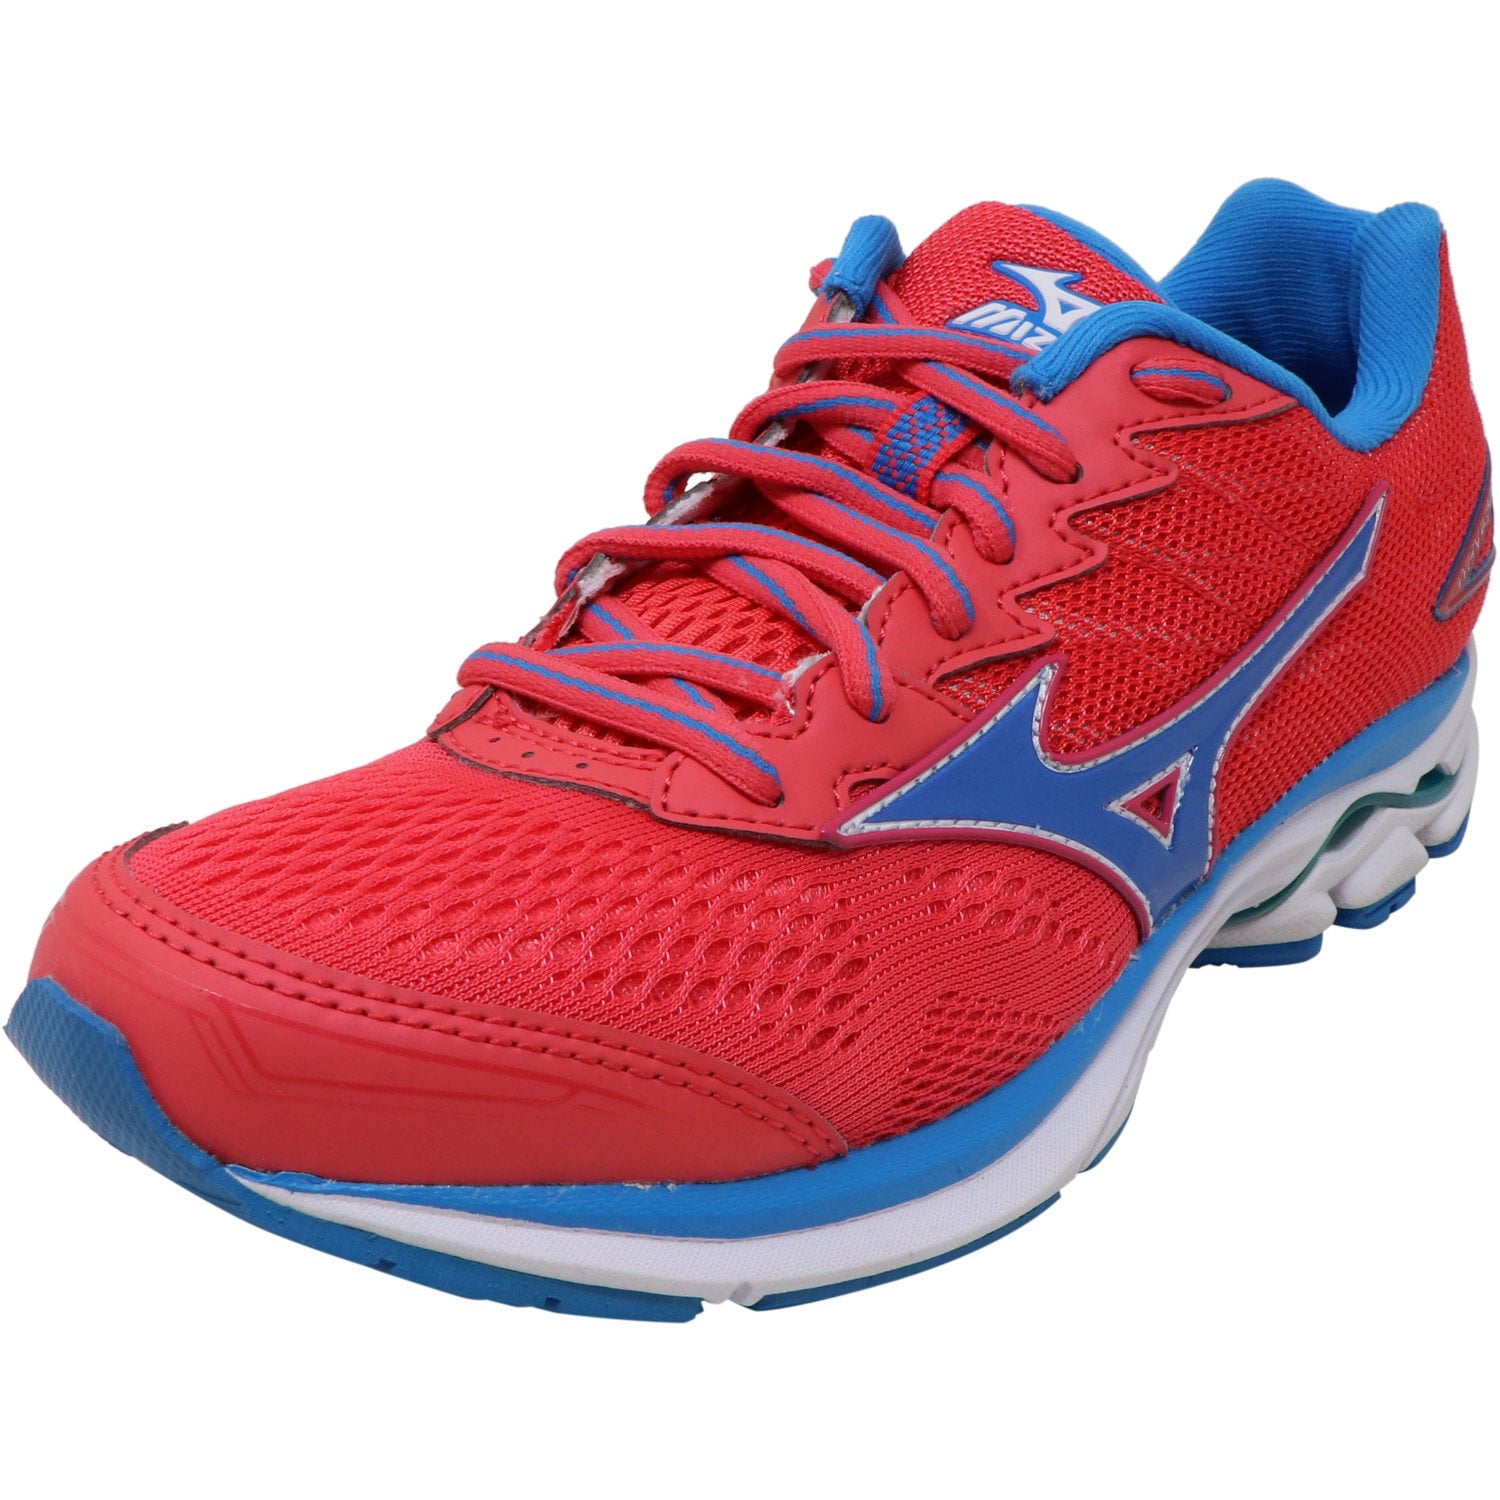 Mizuno Wave Rider 20 Wide Mens Womens Running Shoes Sneakers Pick 1 